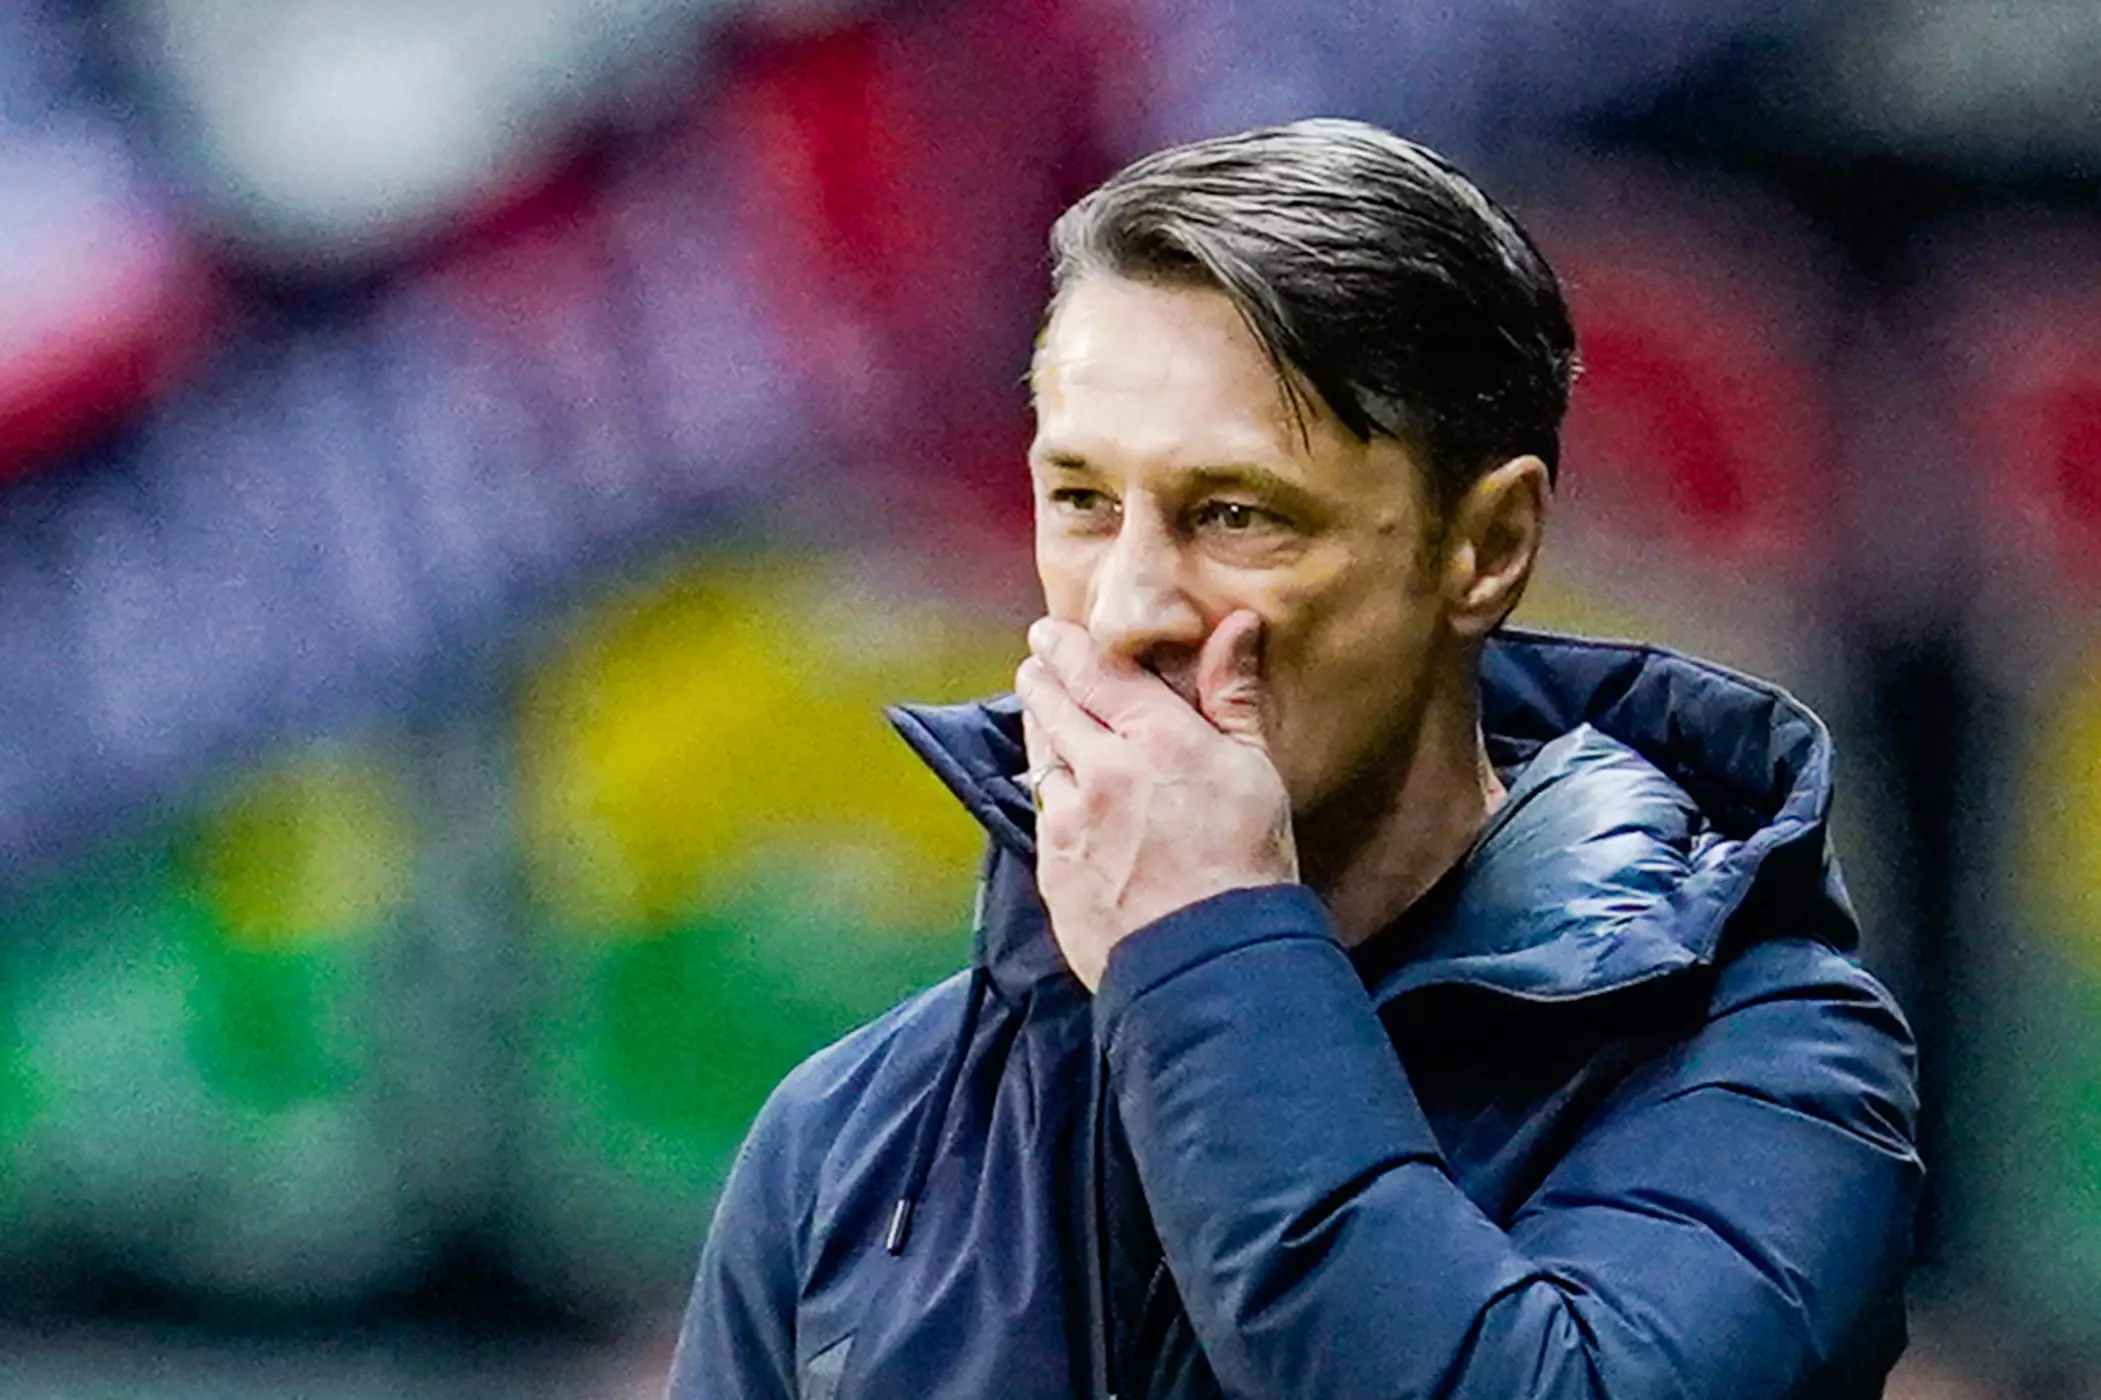 Kovac takes over Monaco after a spell at Bayern Munich. (Image